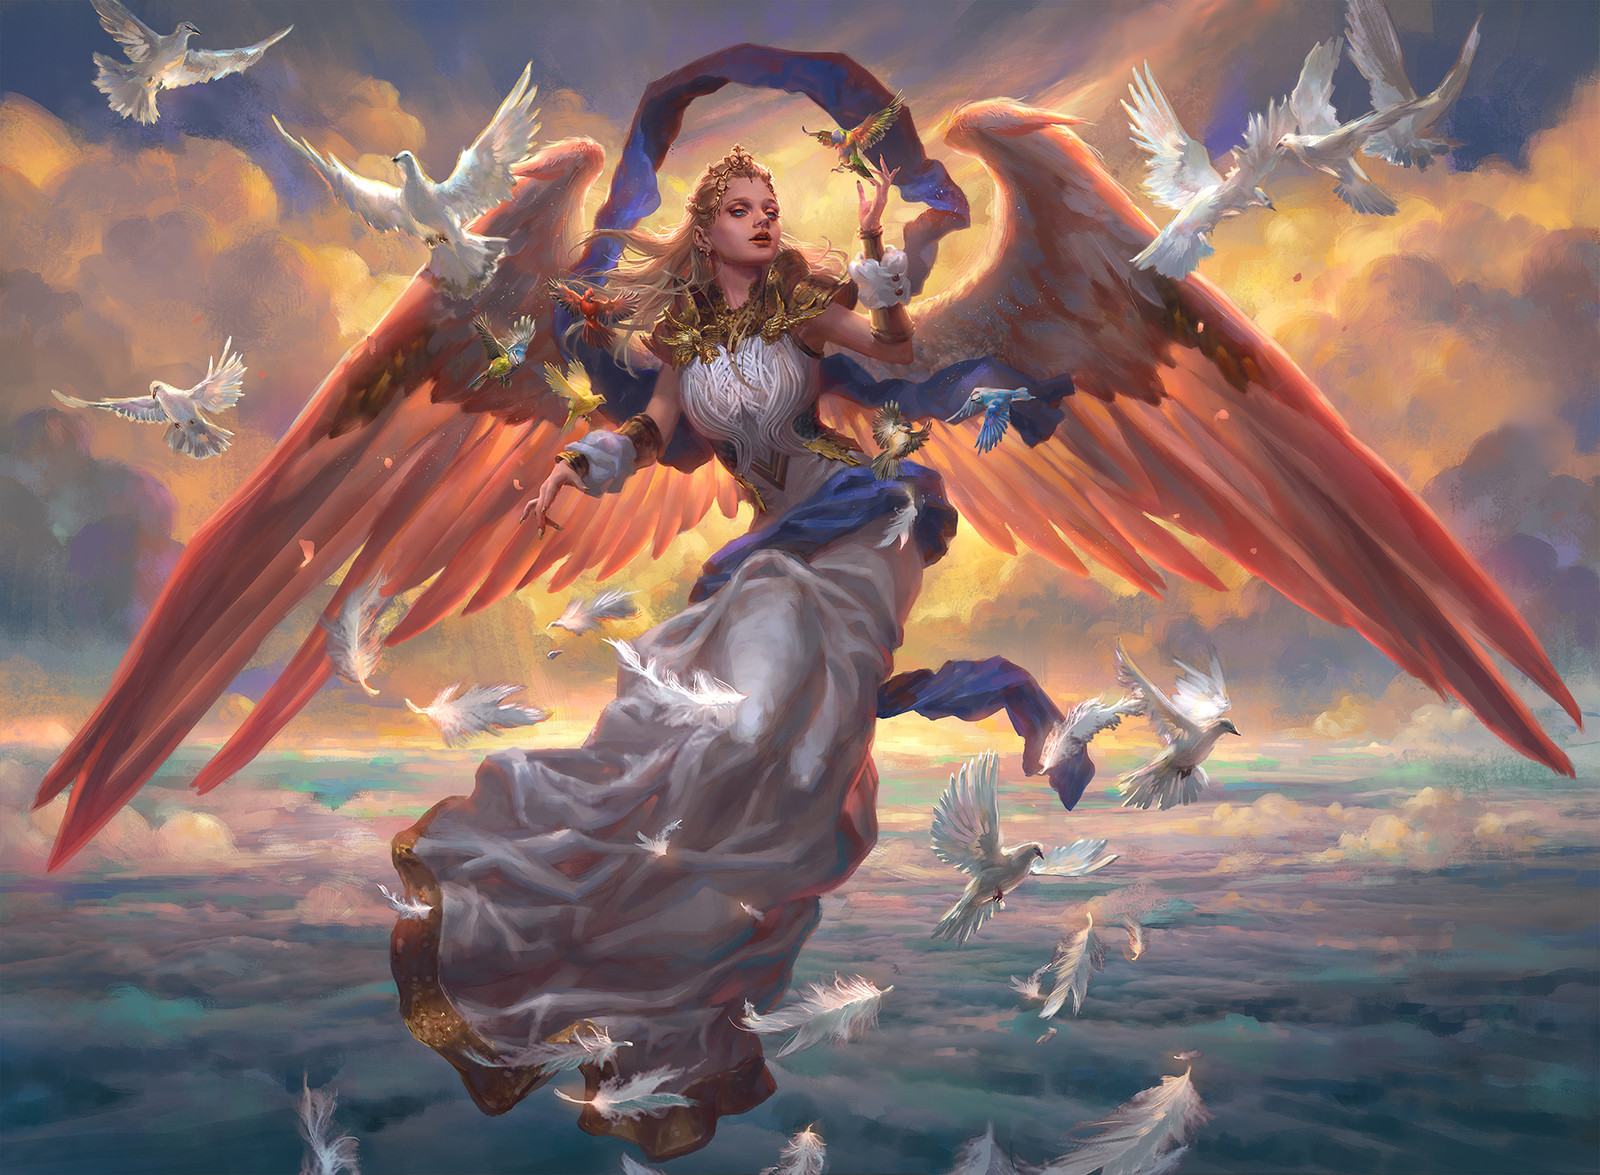 Angel of Dawn for M19 Core Set.
Hope you like it! &lt;3
Thank you for viewing~